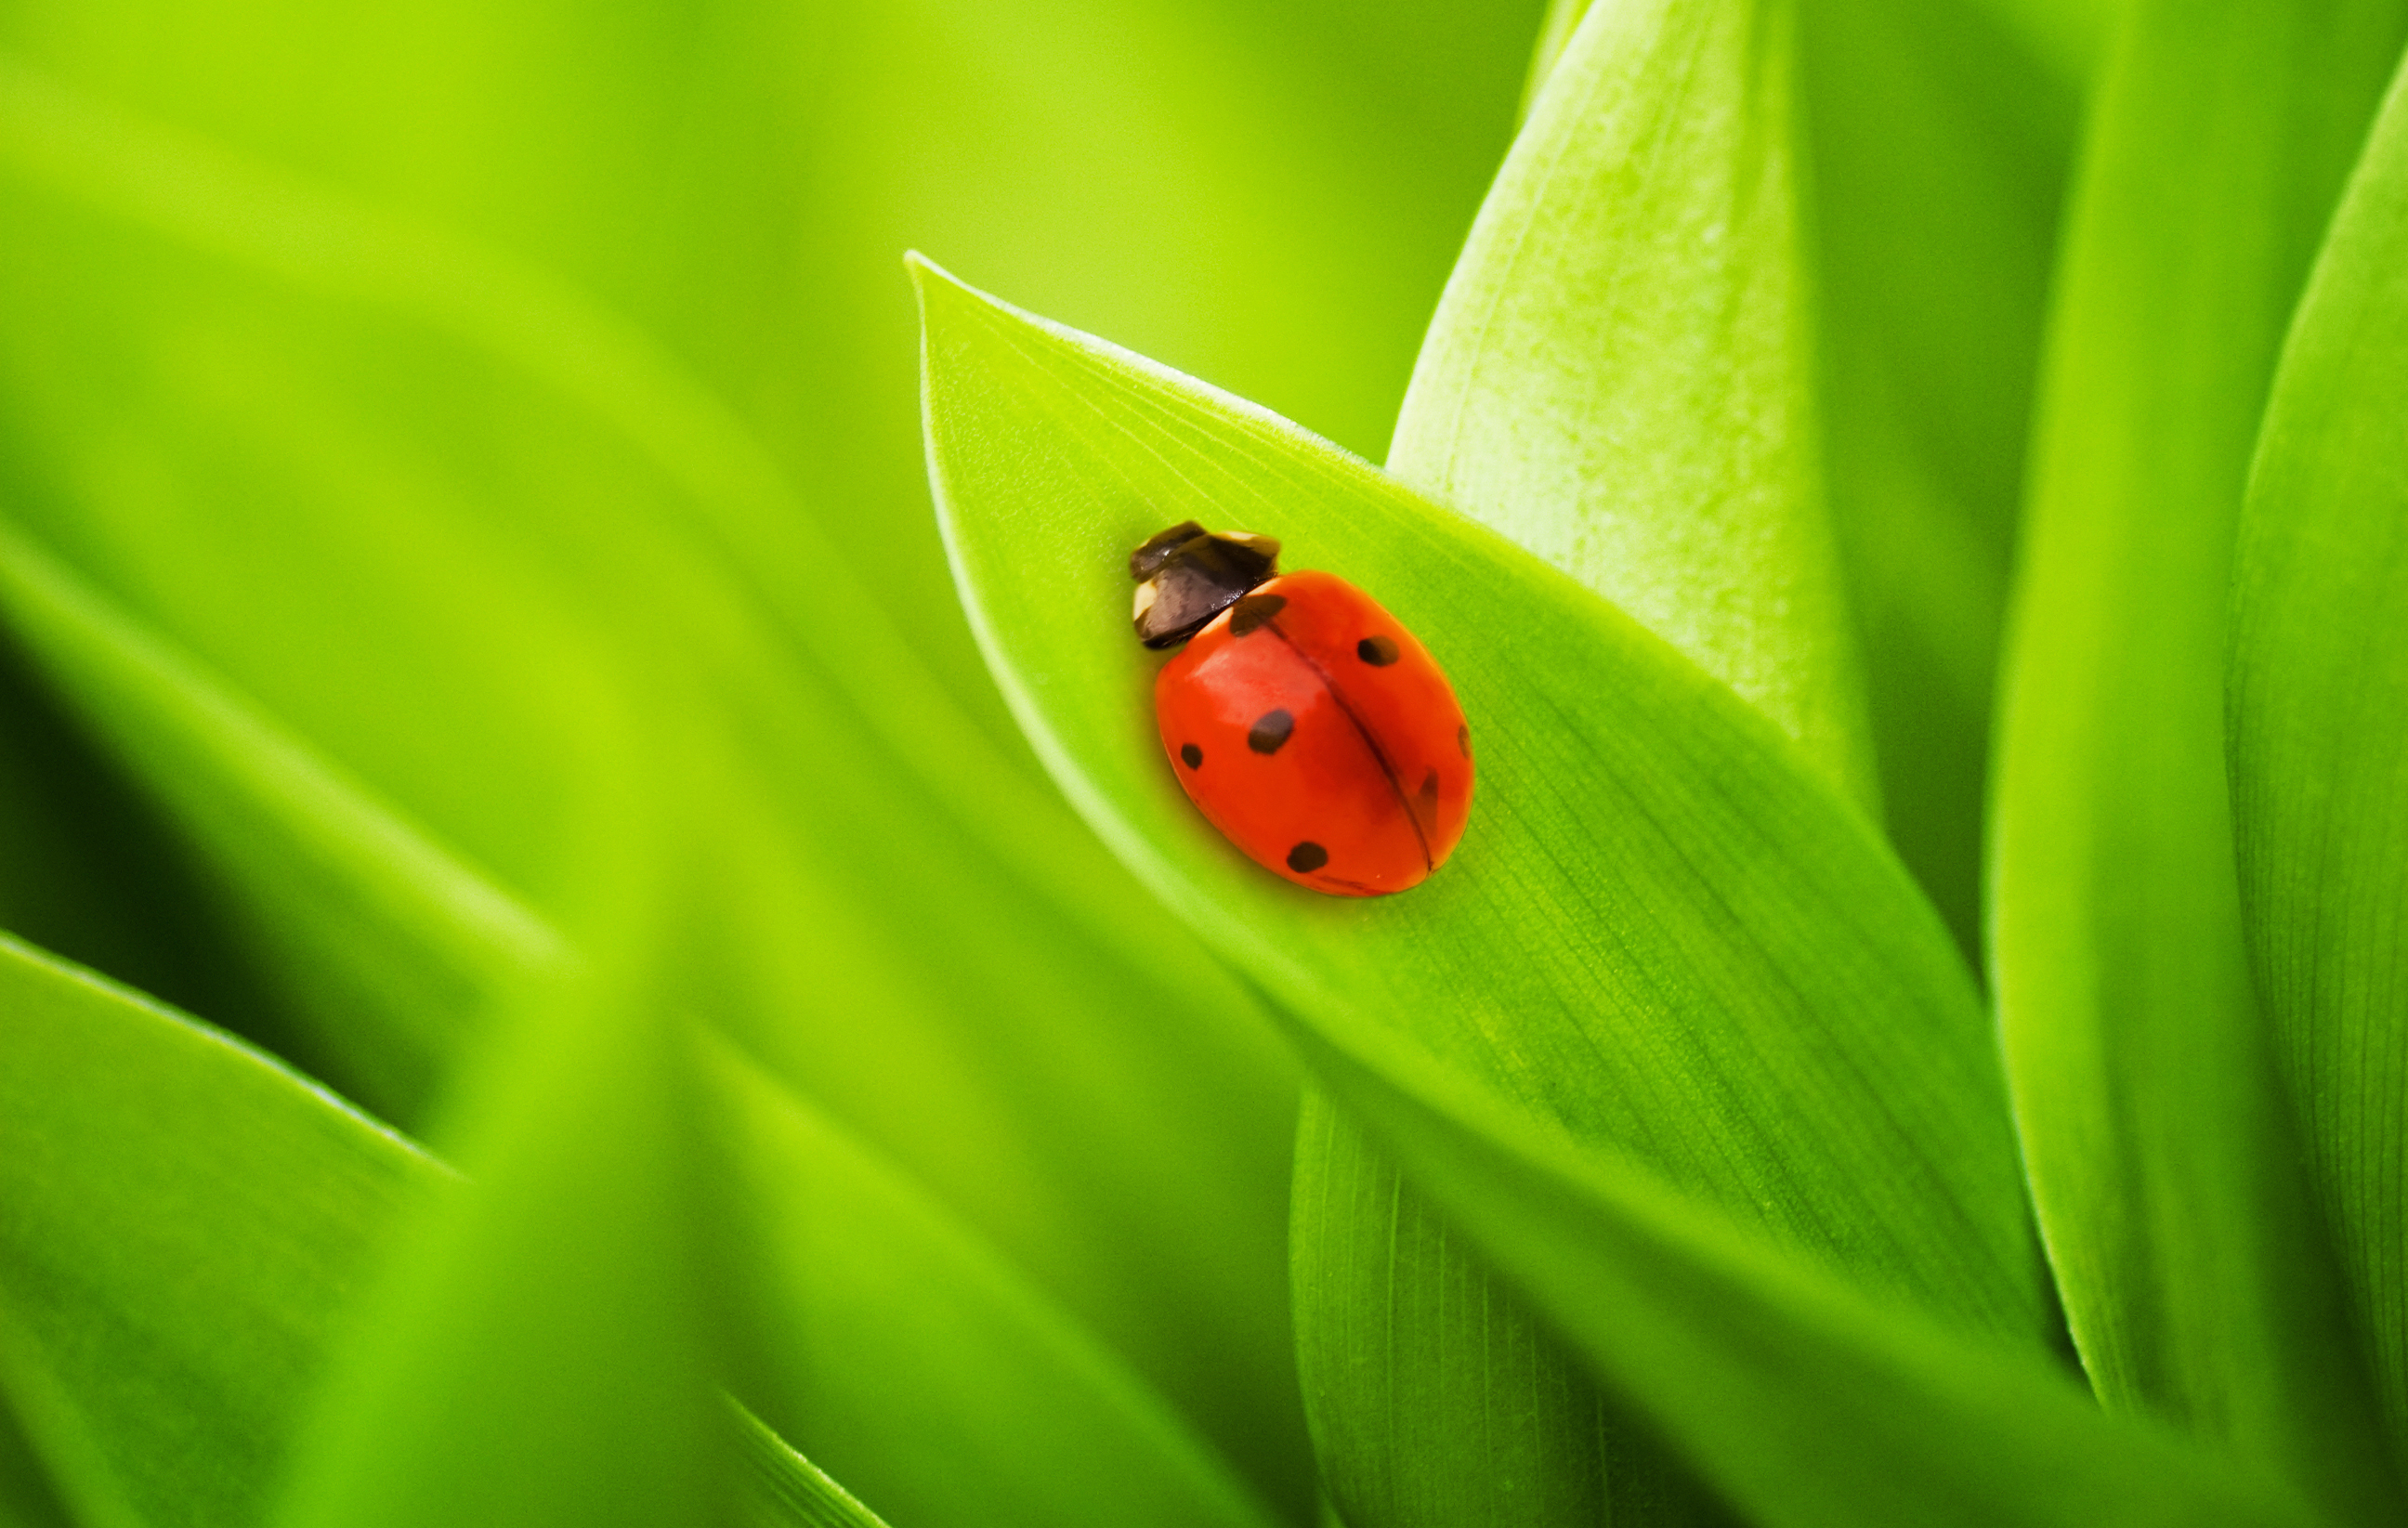 Wallpaper Full HD grass, insects, ladybugs, green